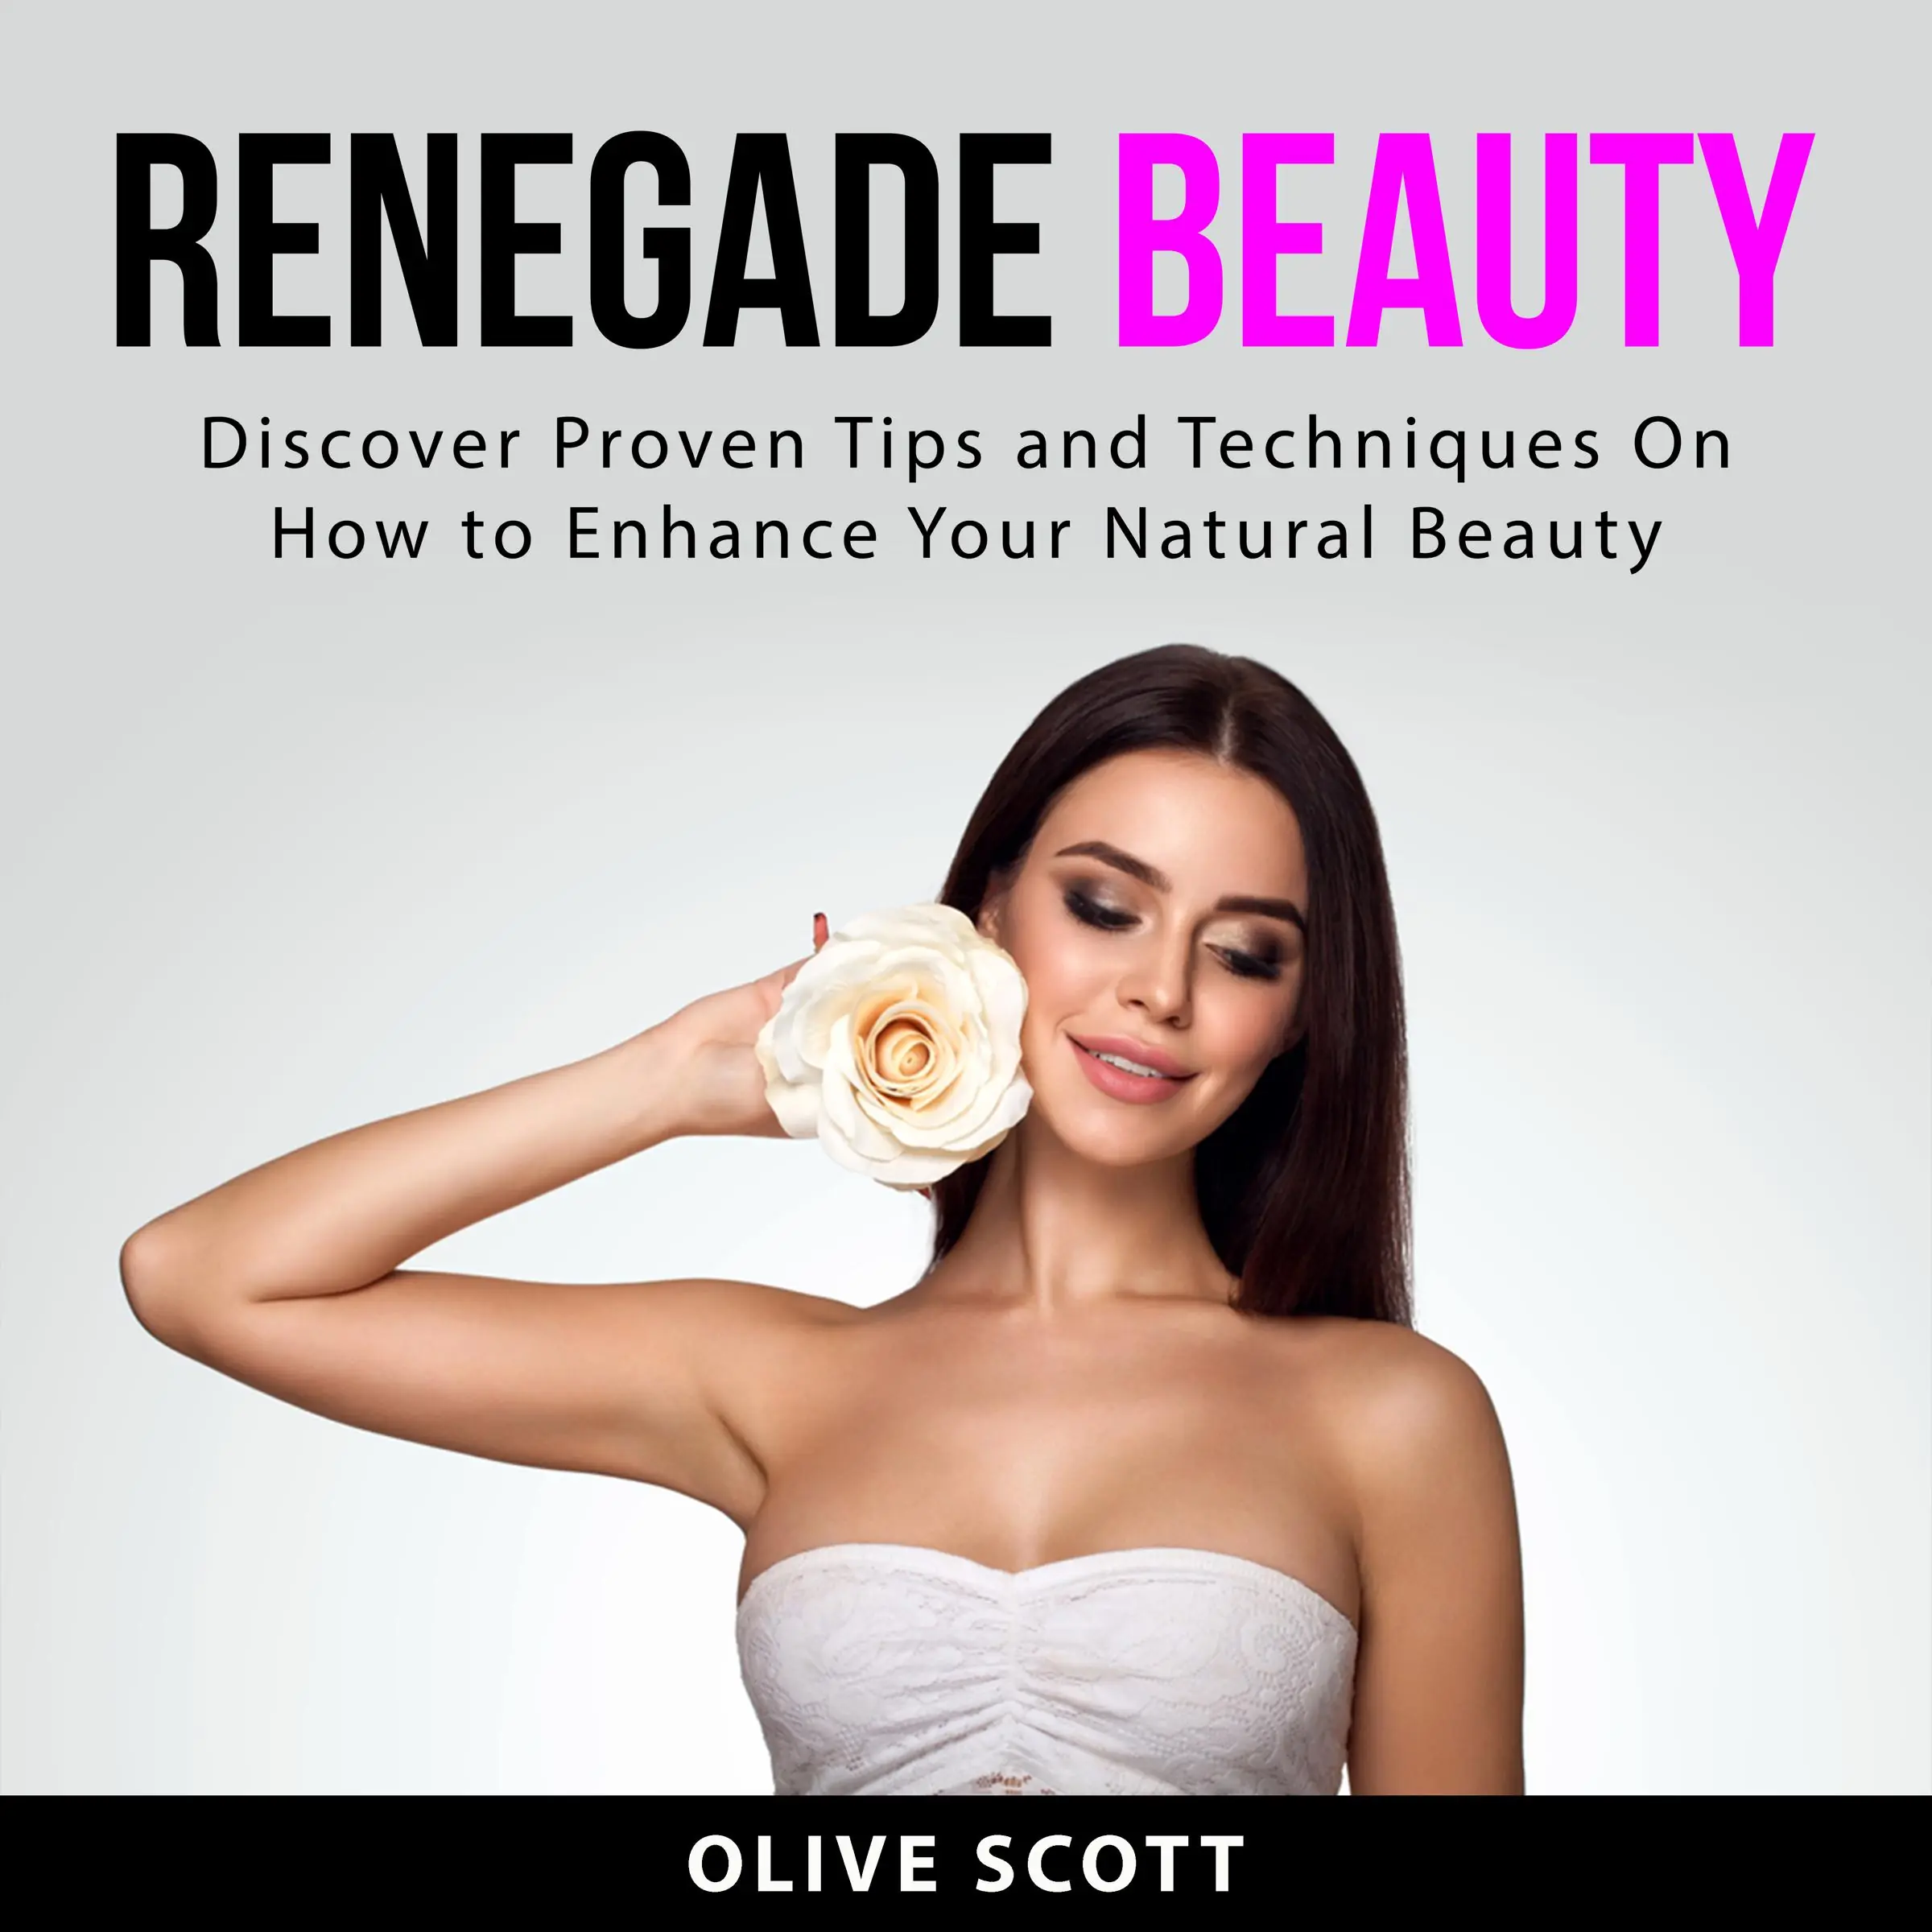 Renegade Beauty: Discover Proven Tips and Techniques On How to Enhance Your Natural Beauty Audiobook by Olive Scott